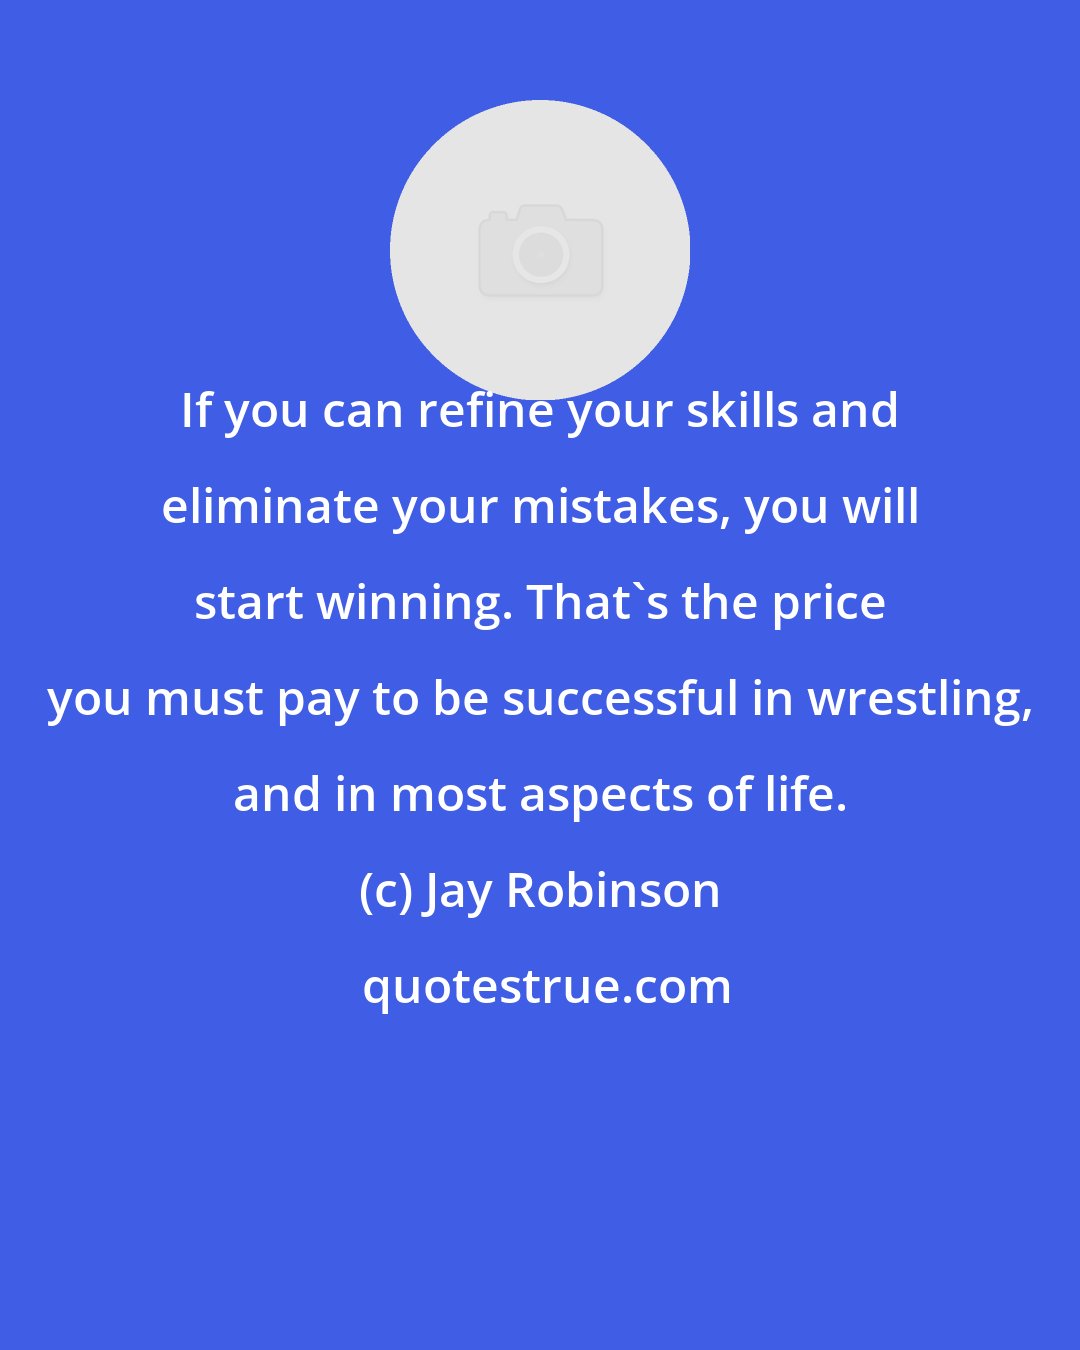 Jay Robinson: If you can refine your skills and eliminate your mistakes, you will start winning. That's the price you must pay to be successful in wrestling, and in most aspects of life.